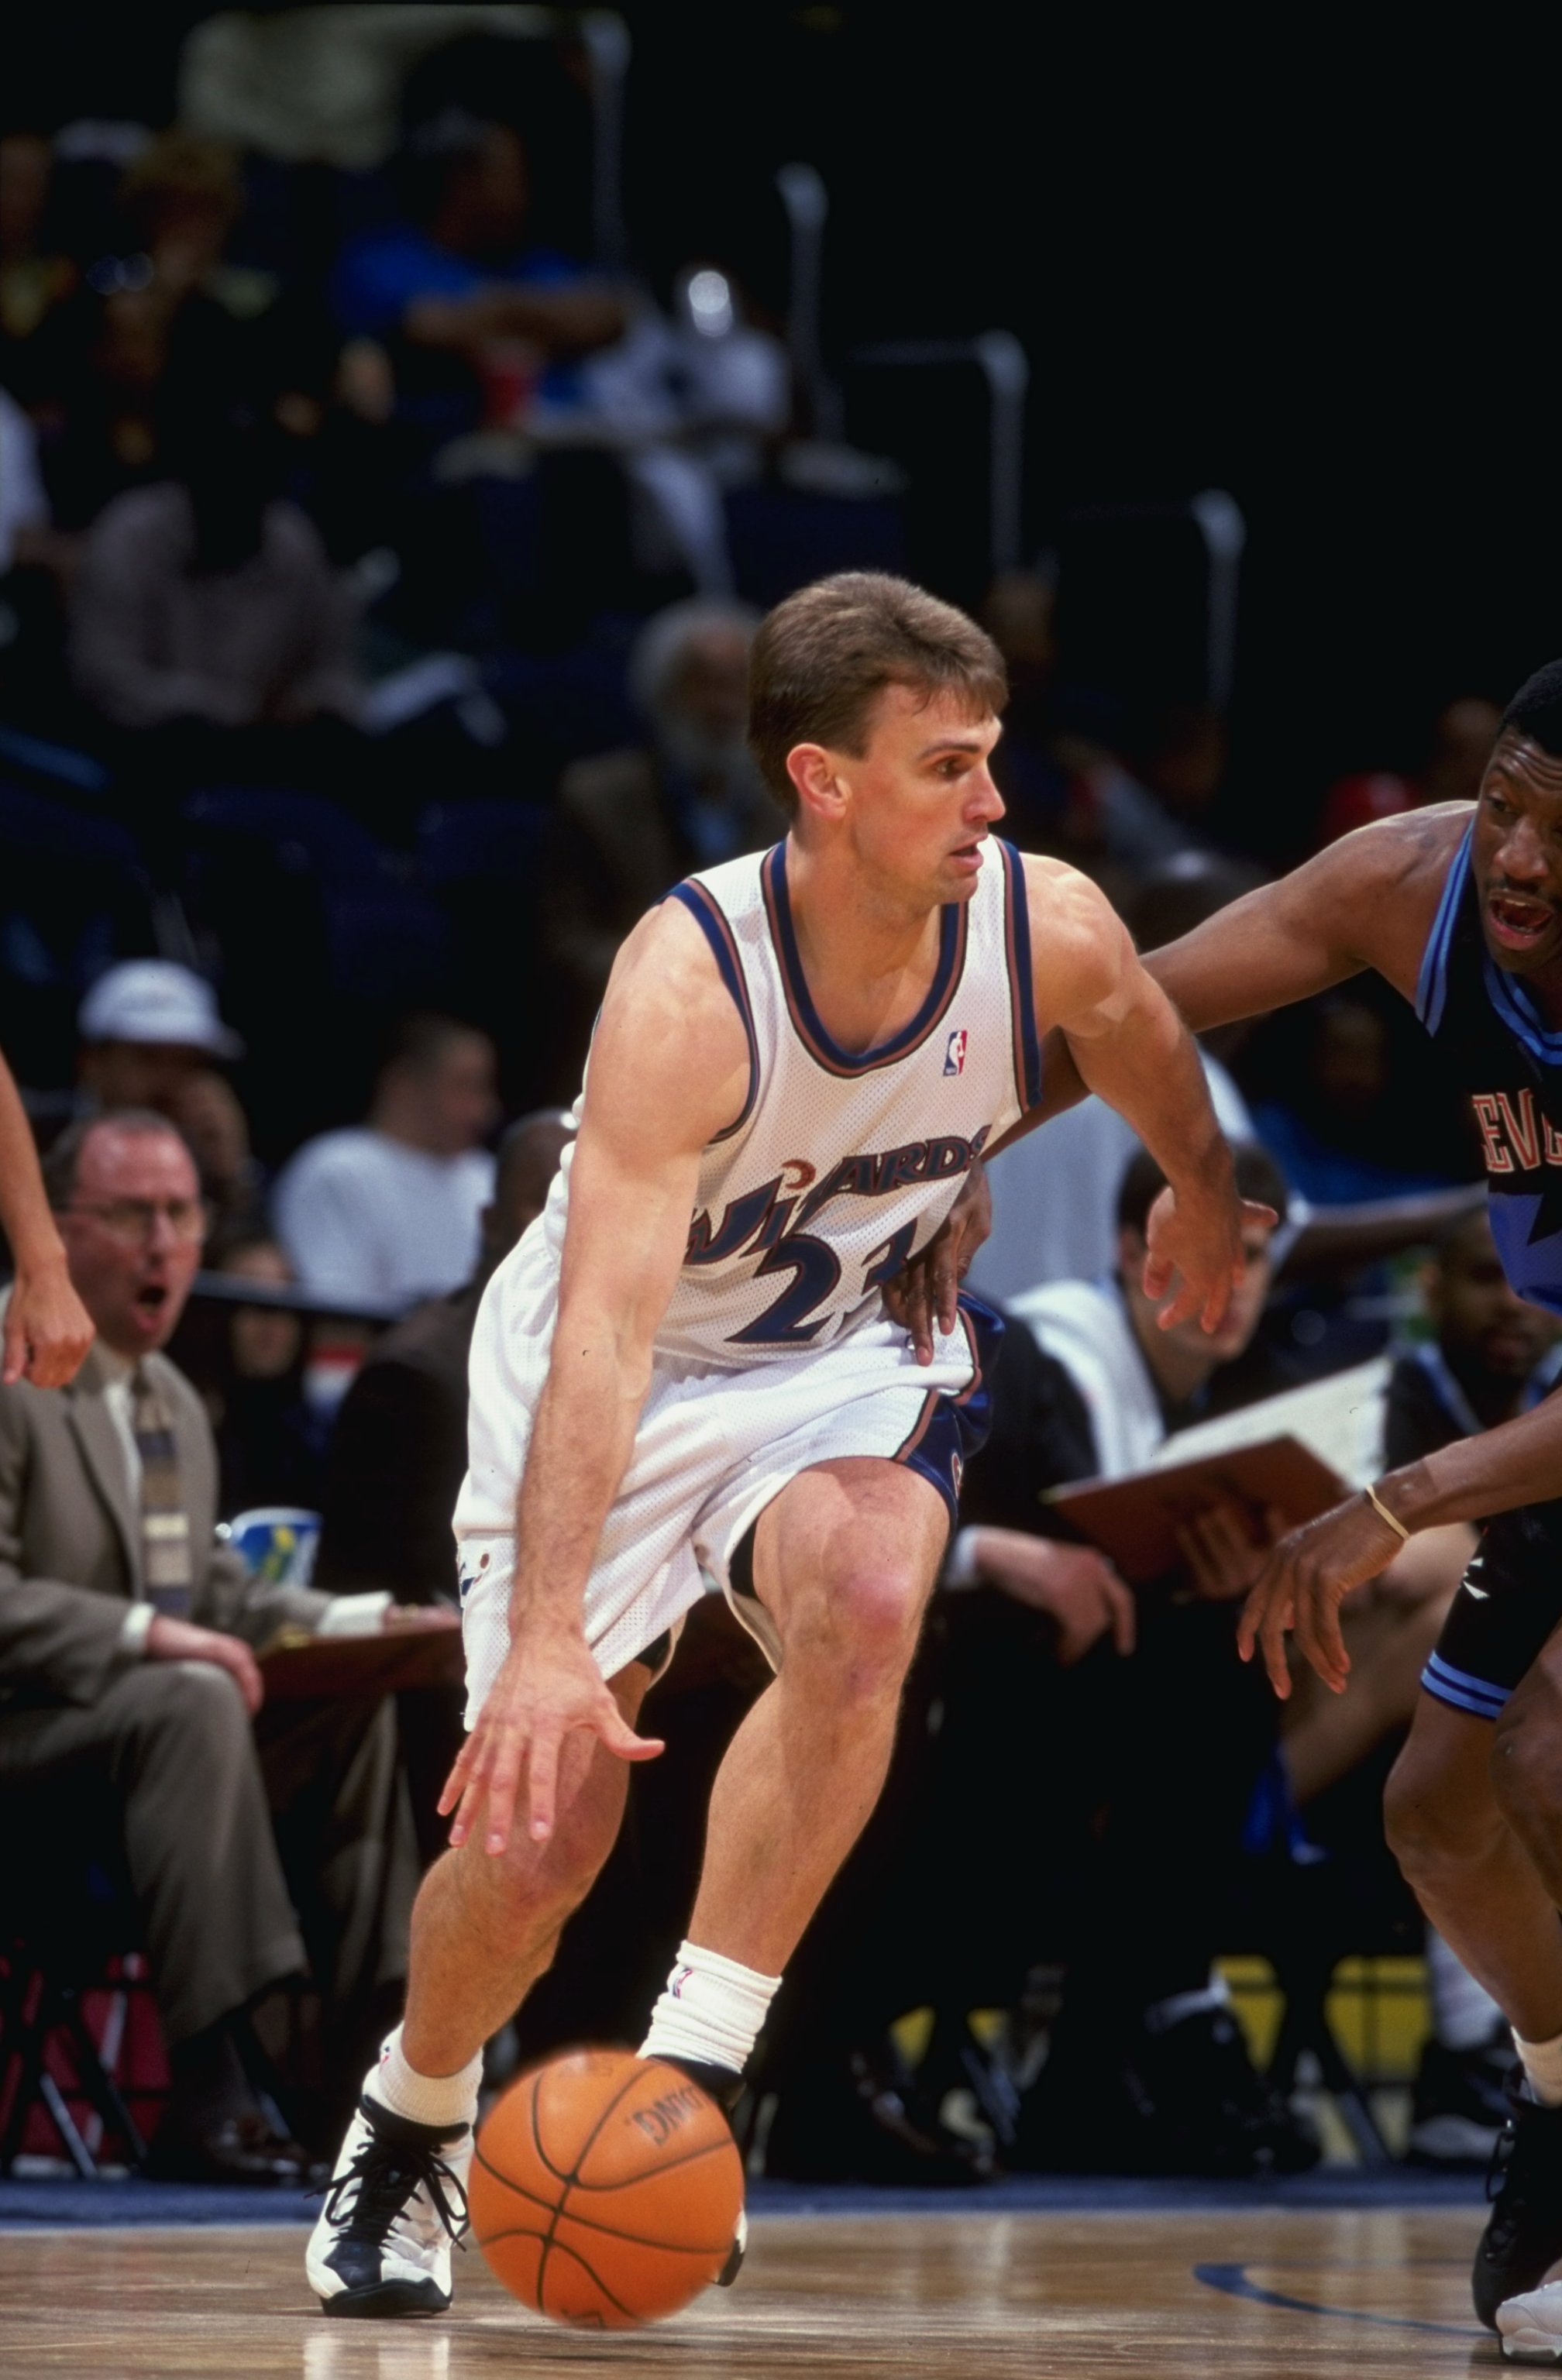 29 Apr 1999: Tim Legler #23 of the Washington Wizards dribbles the ball during the game against the Cleveland Cavaliers at the MCI Center in Washington, D.C. The Wizards defeated the Cavaliers 97-86.  Mandatory Credit: Ezra O. Shaw  /Allsport